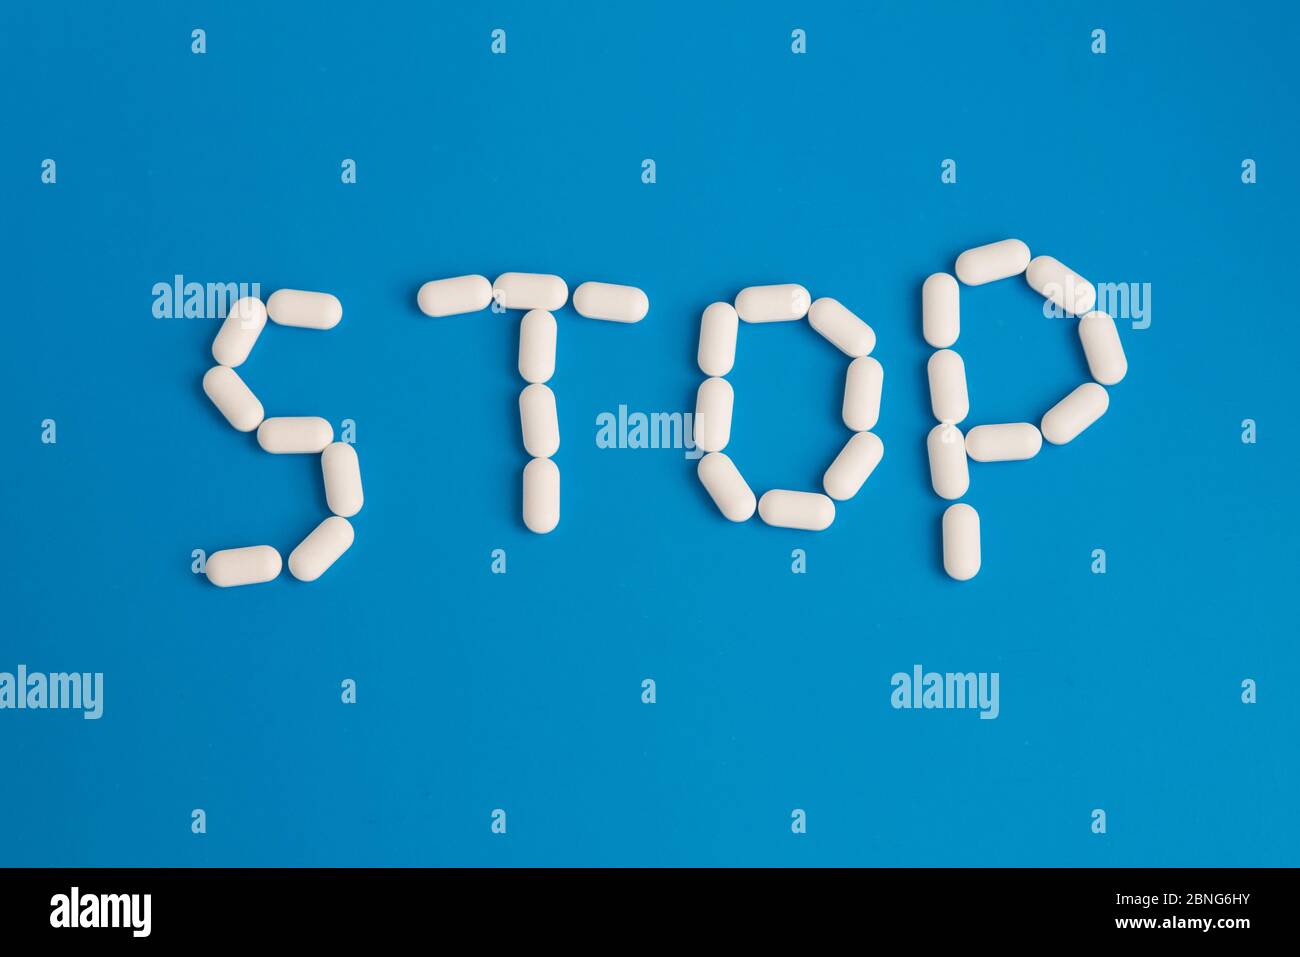 Flat lay of stop word made of white pills on the blue background Stock Photo